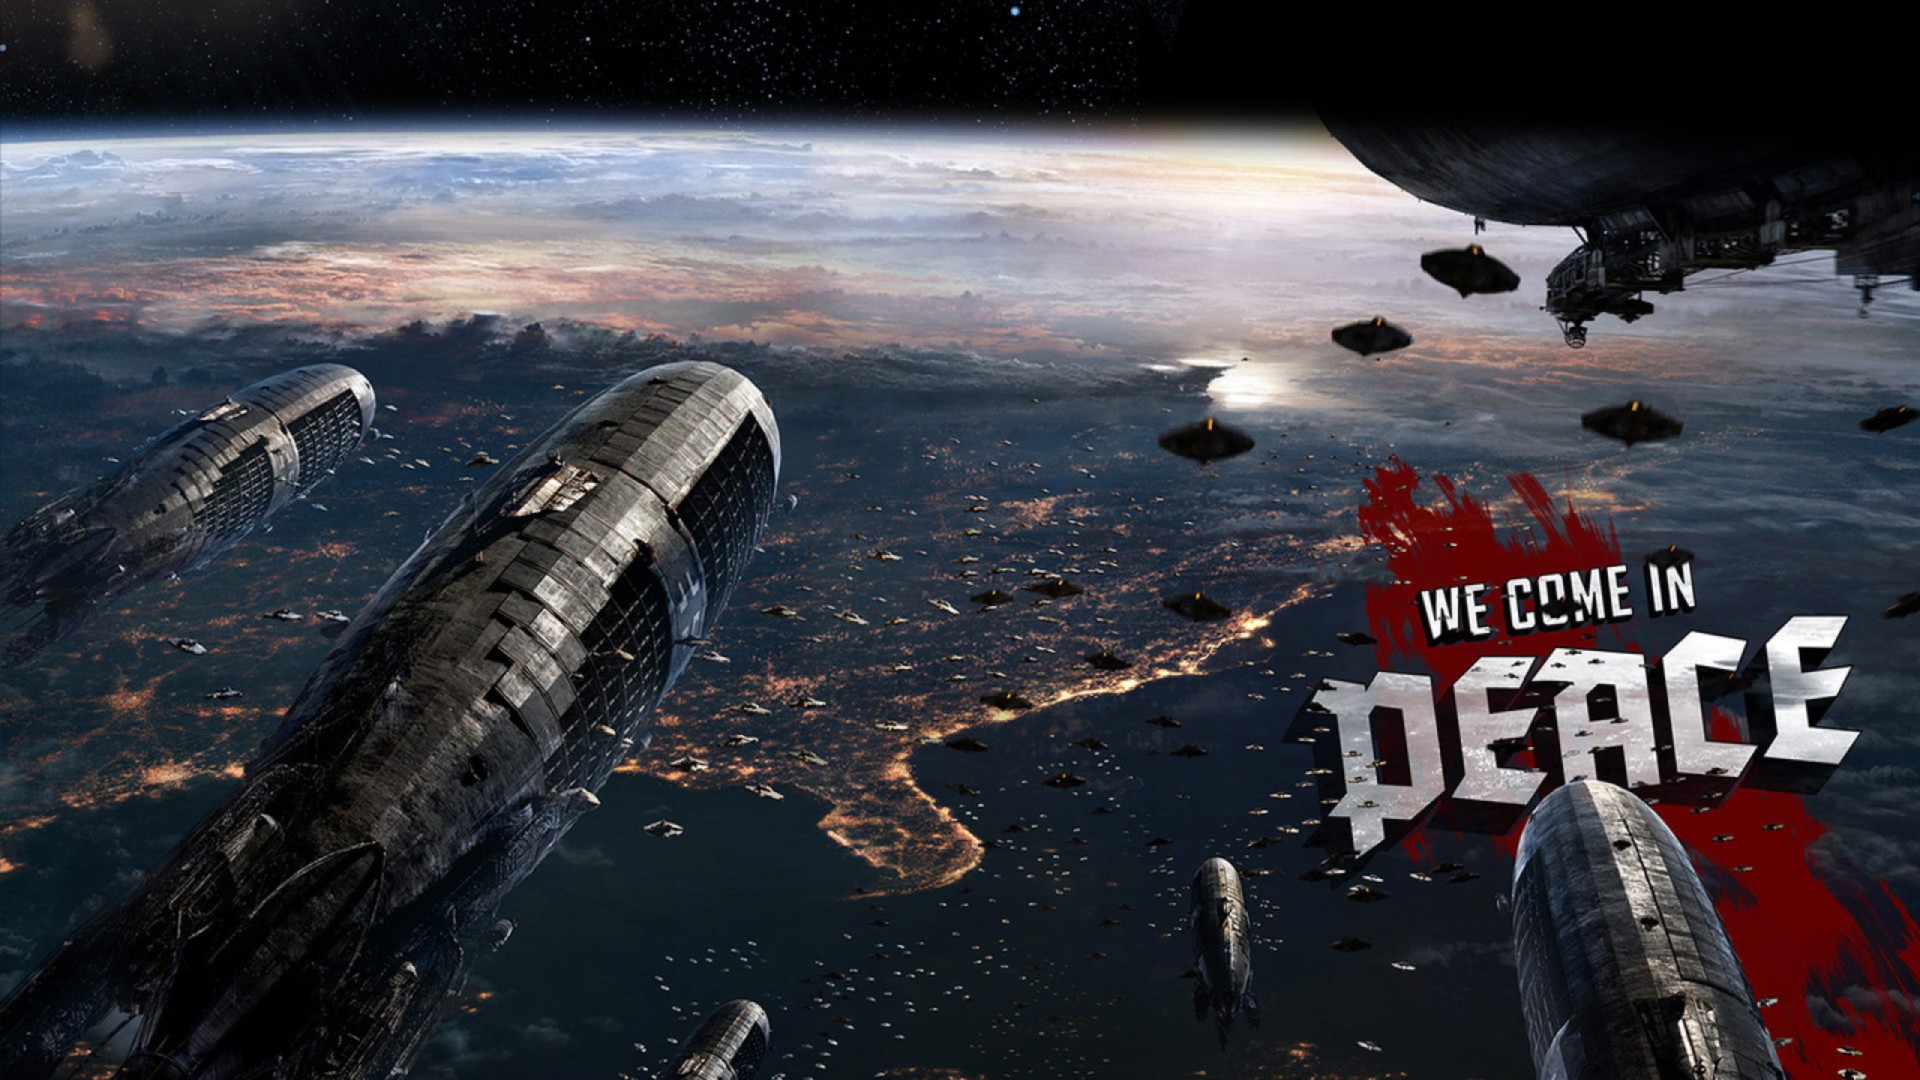 Iron Sky: Invasion Backgrounds, Compatible - PC, Mobile, Gadgets| 1920x1080 px